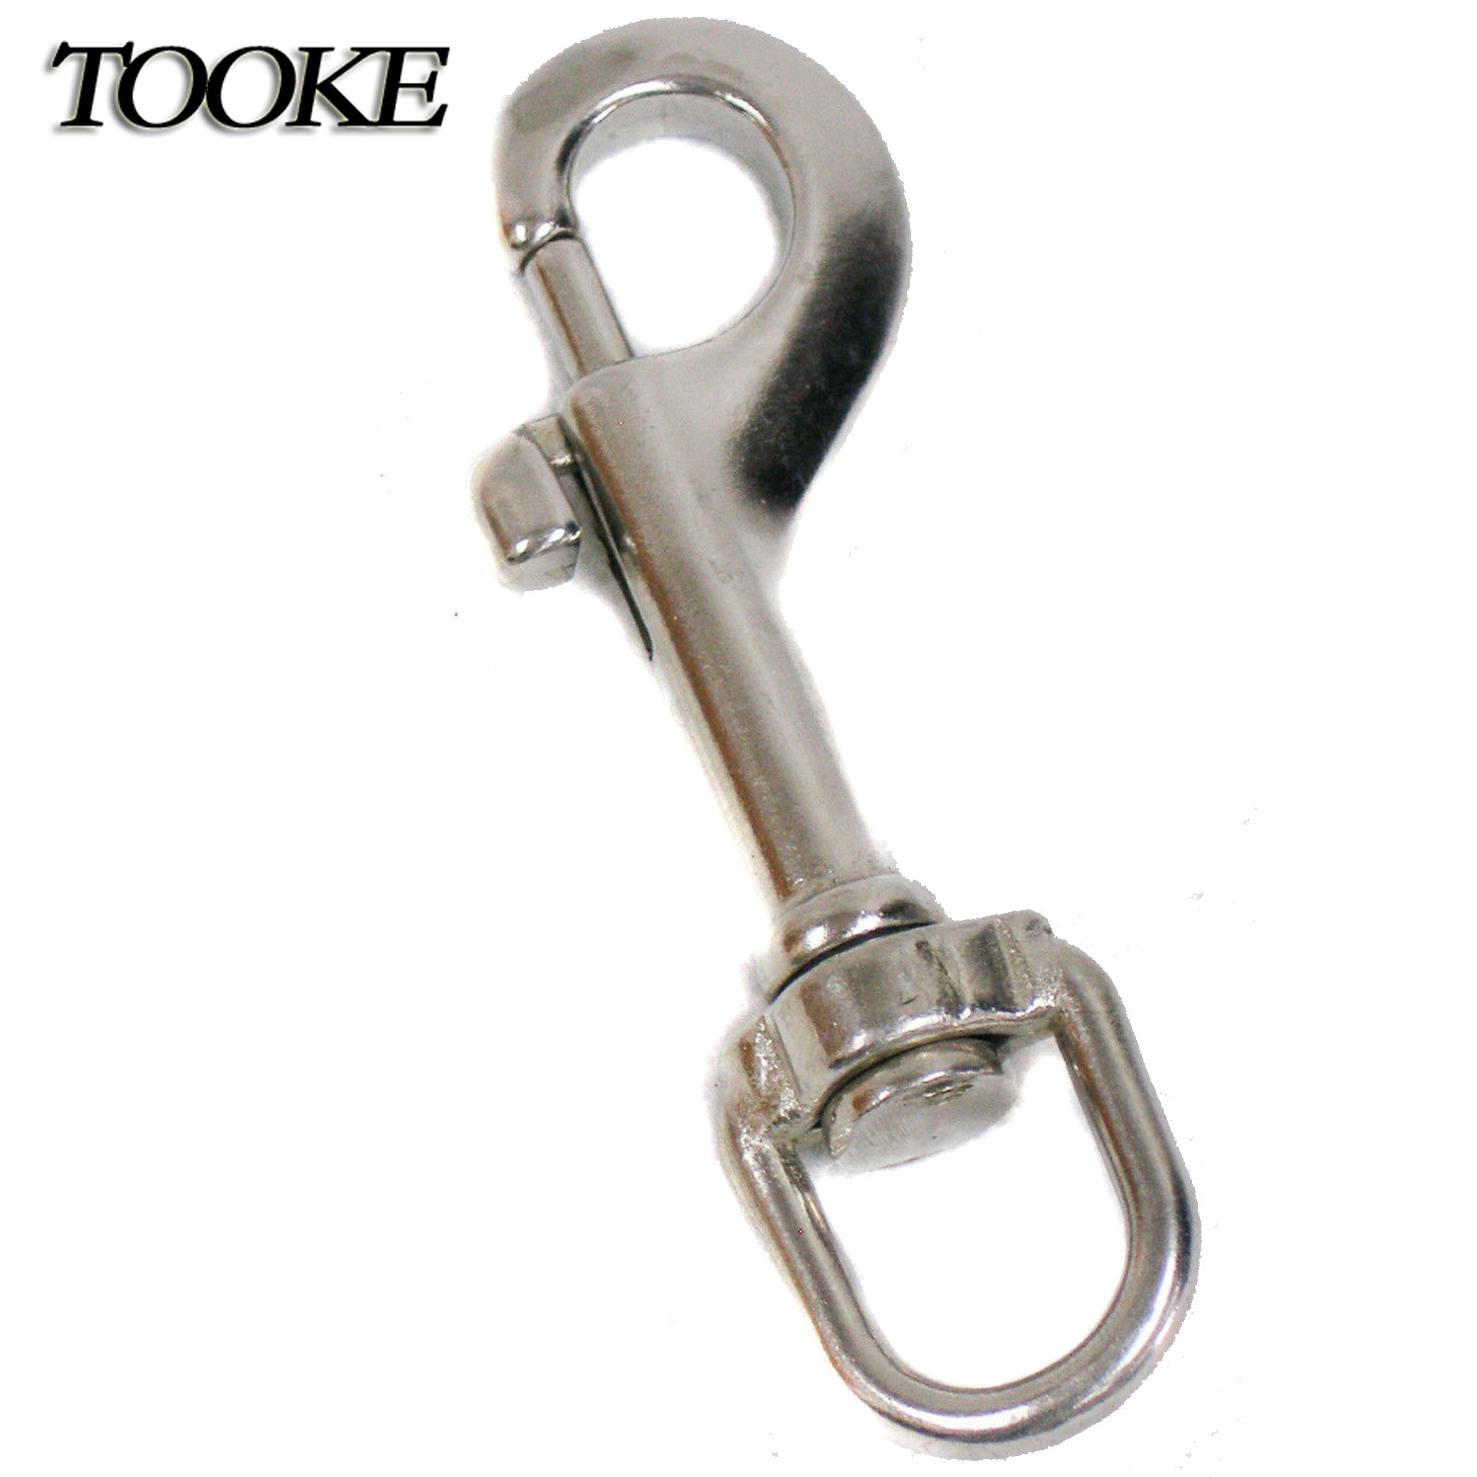 TOOKE Scuba Diving 3.7 316 Stainless Steel Single Ended Bolt Snap Buckle Metal Clip